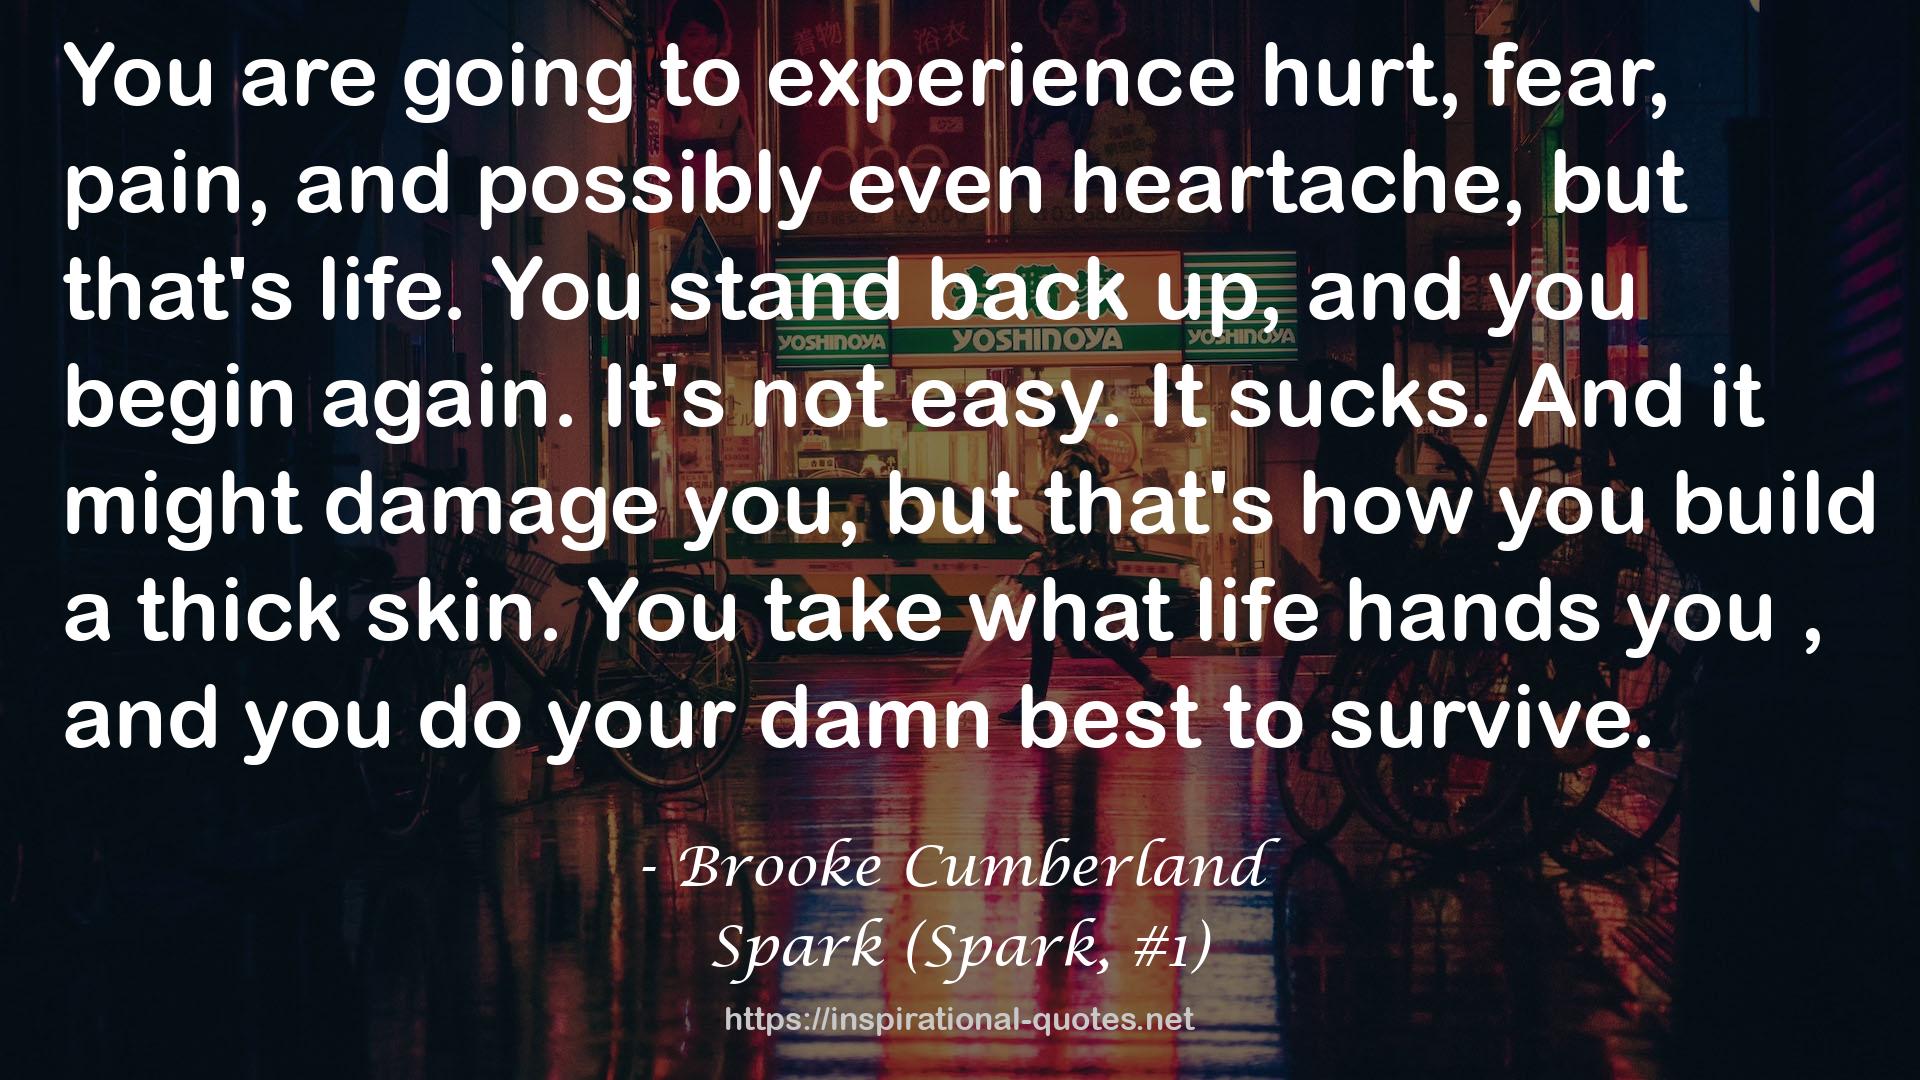 Spark (Spark, #1) QUOTES